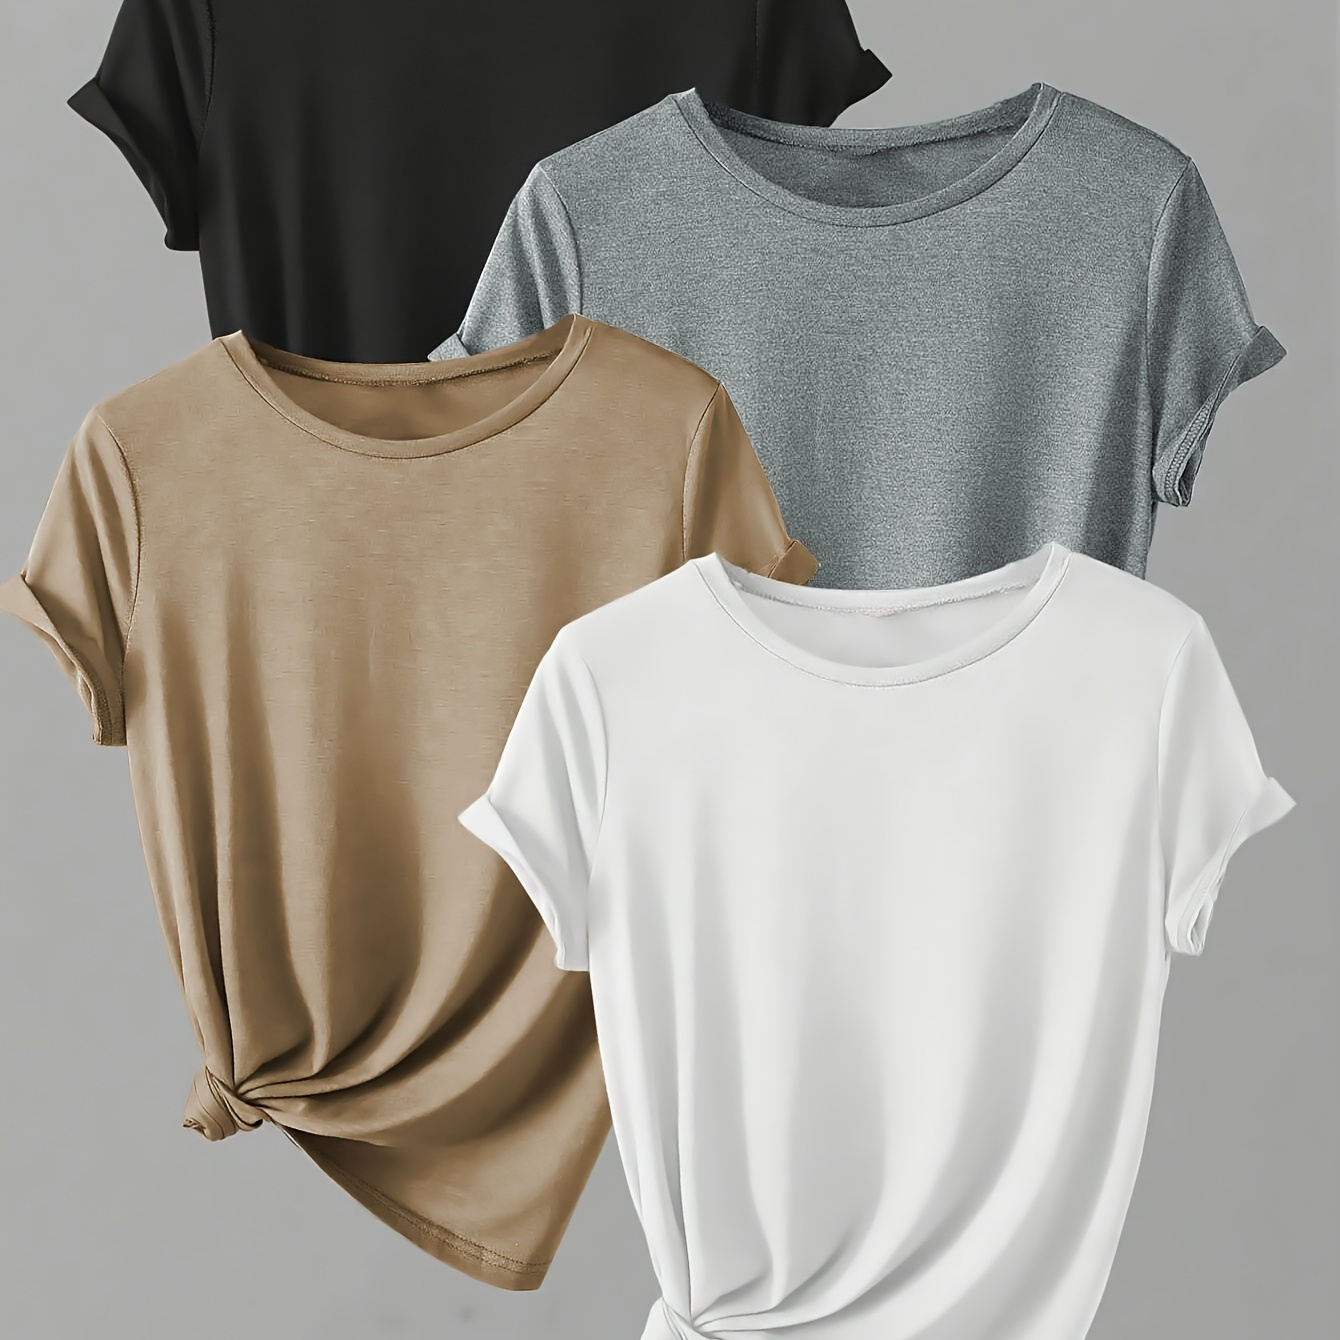 

Solid T-shirt 4 Pack, Casual Crew Neck Short Sleeve T-shirt For Spring & Summer, Women's Clothing